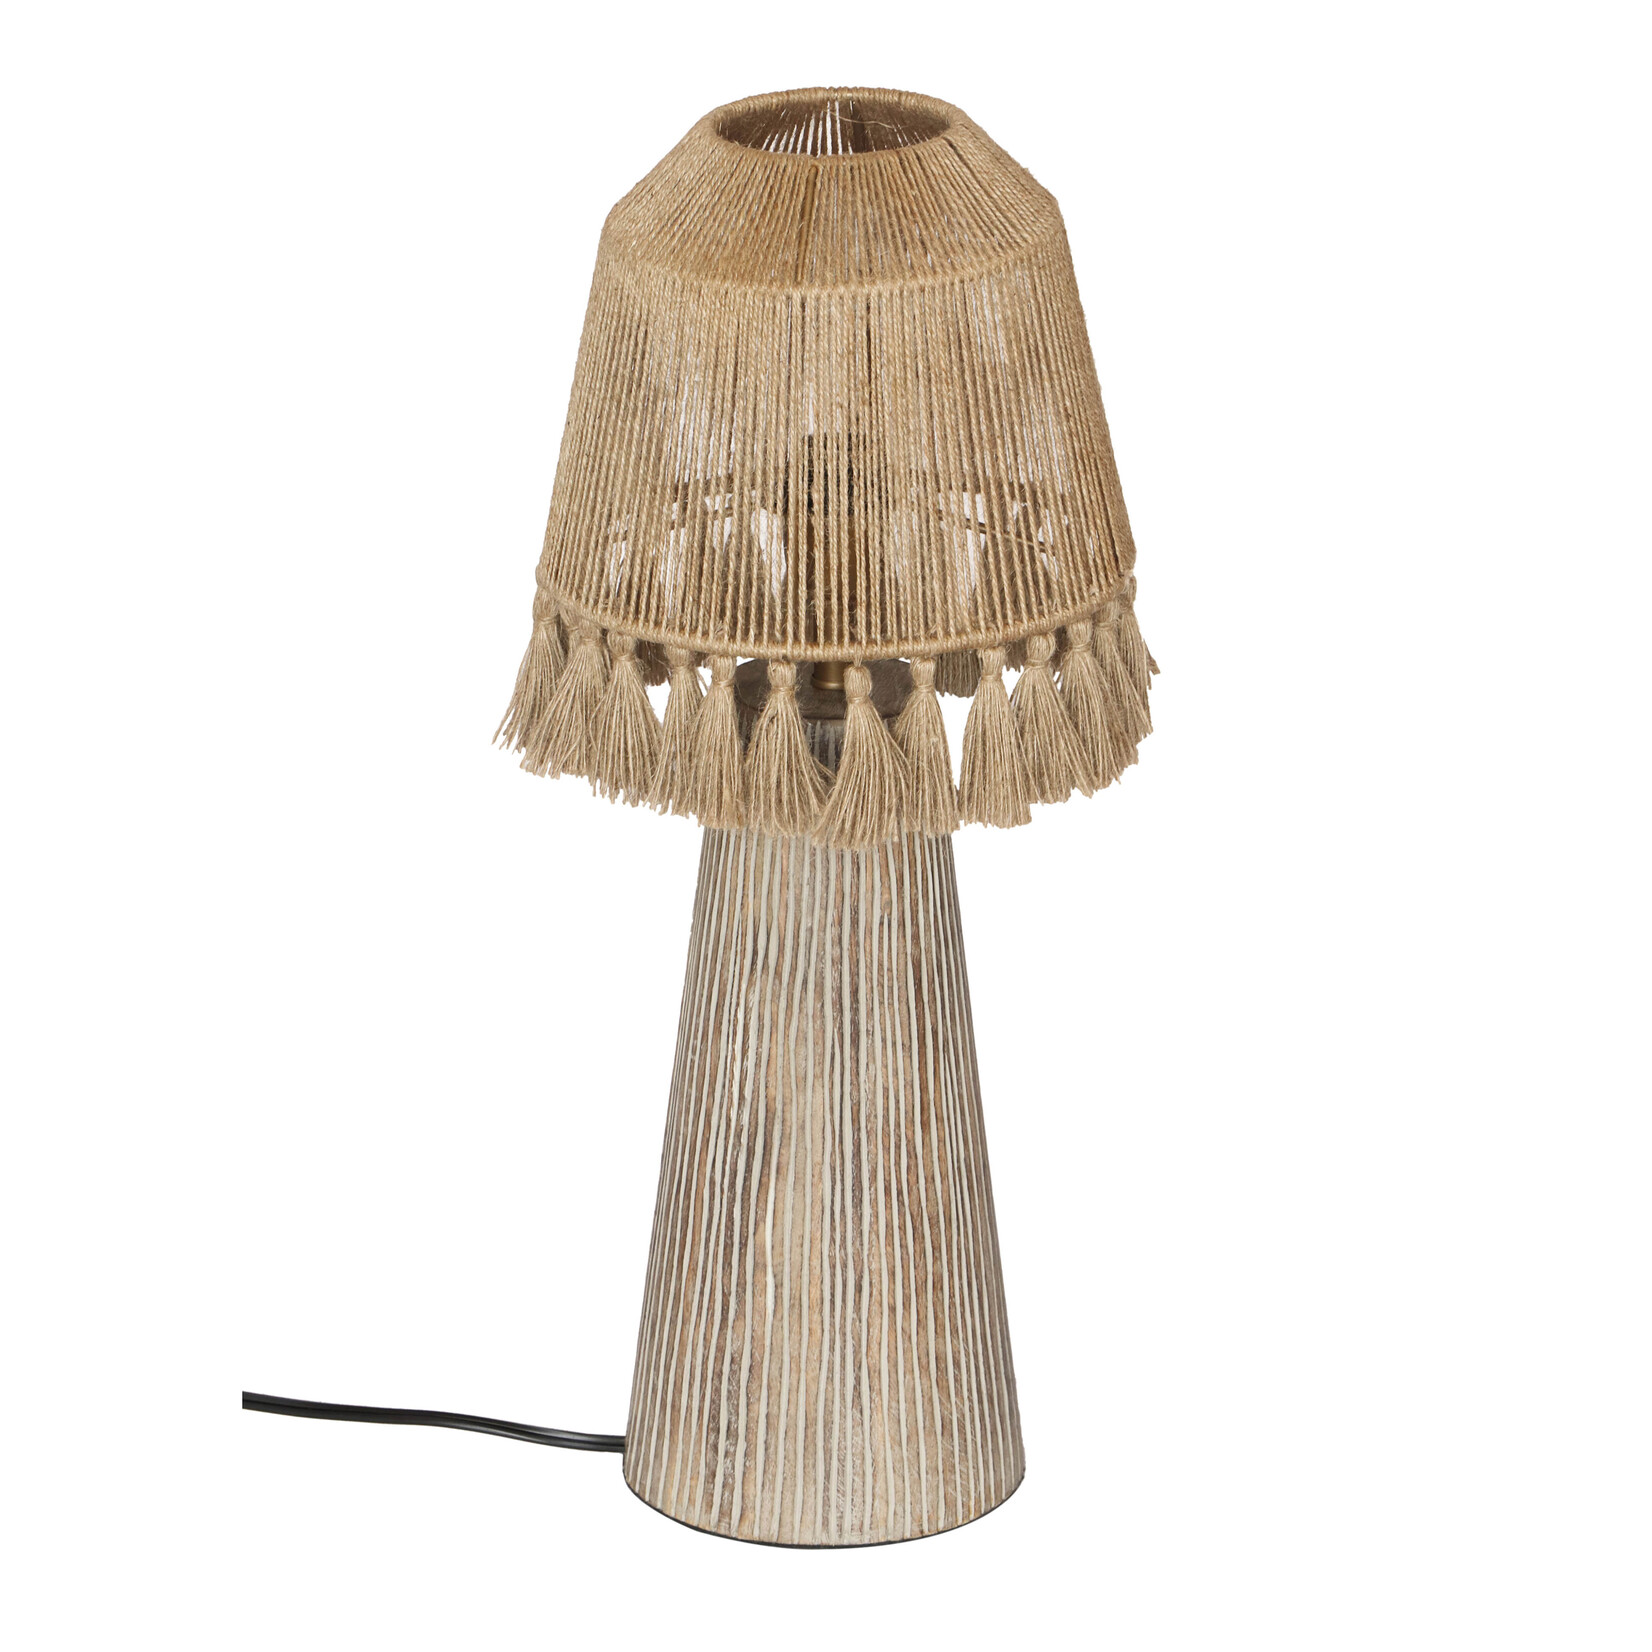 Tov VED NATURAL TABLE LAMP